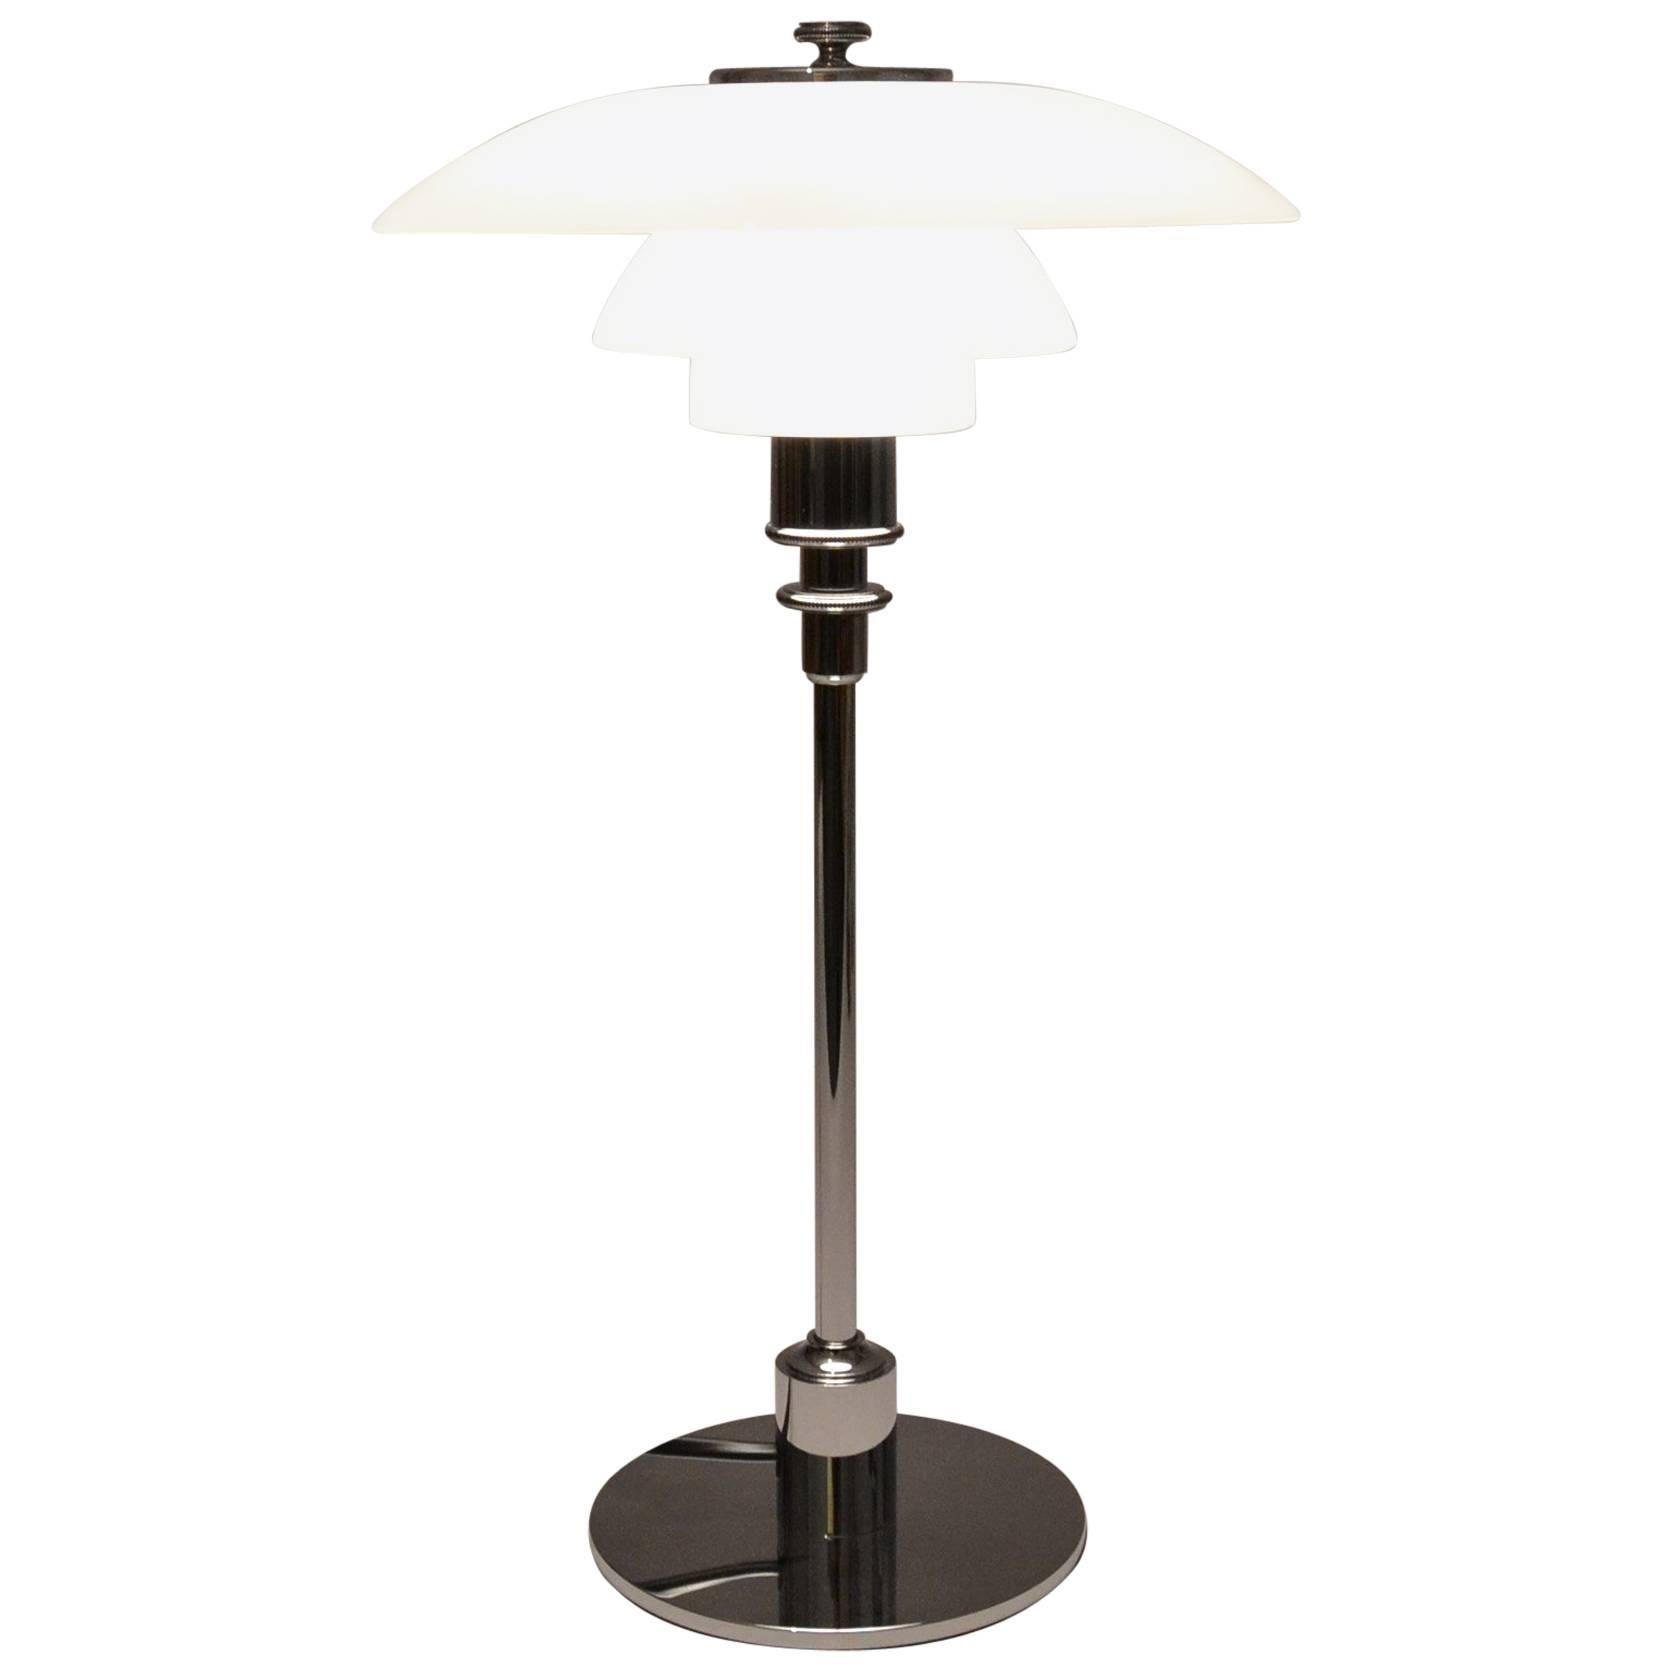 Designed by Poul Henningsen, circa 1927, produced by Louis Poulsen stainless steel with opaline glass.